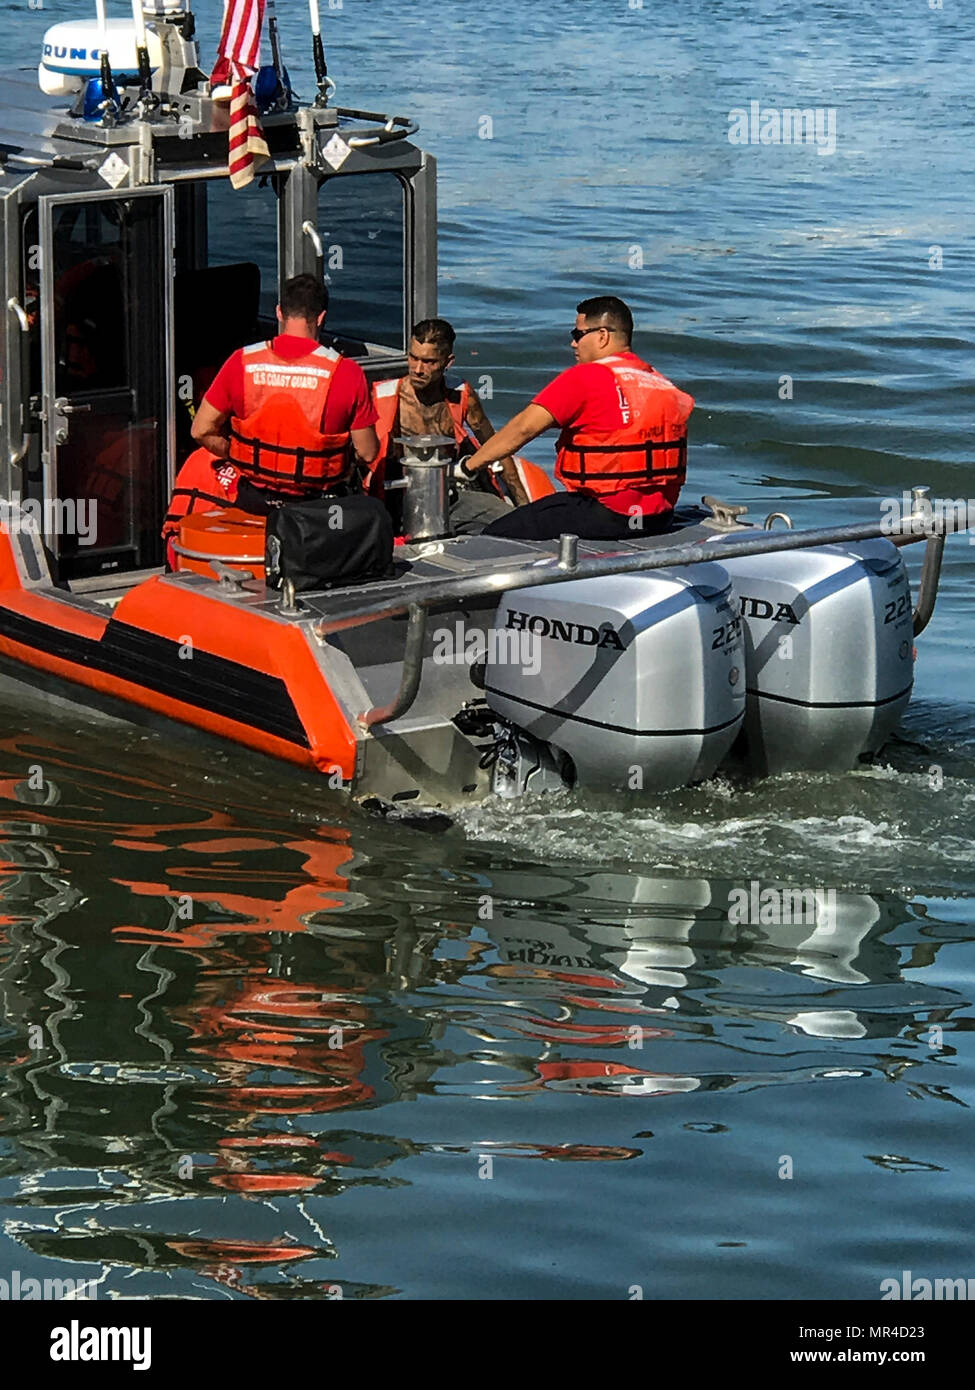 A Coast Guard 29-foot Special Purpose Craft-Shallow Water boat crew from Station Fort Myers Beach and Lee County EMS personnel are shown Tuesday, May 9, 2017 with a 28-year-old man (center) in need of medical attention aboard the SPC-SW near Estero Bay, Florida. The man was medevacked from the sailboat Anna Maria due to suffering from abdominal pain and transferred to EMS on shore in stable condition. (U.S. Coast Guard photo by Petty Officer 1st Class Shae Currington) Stock Photo